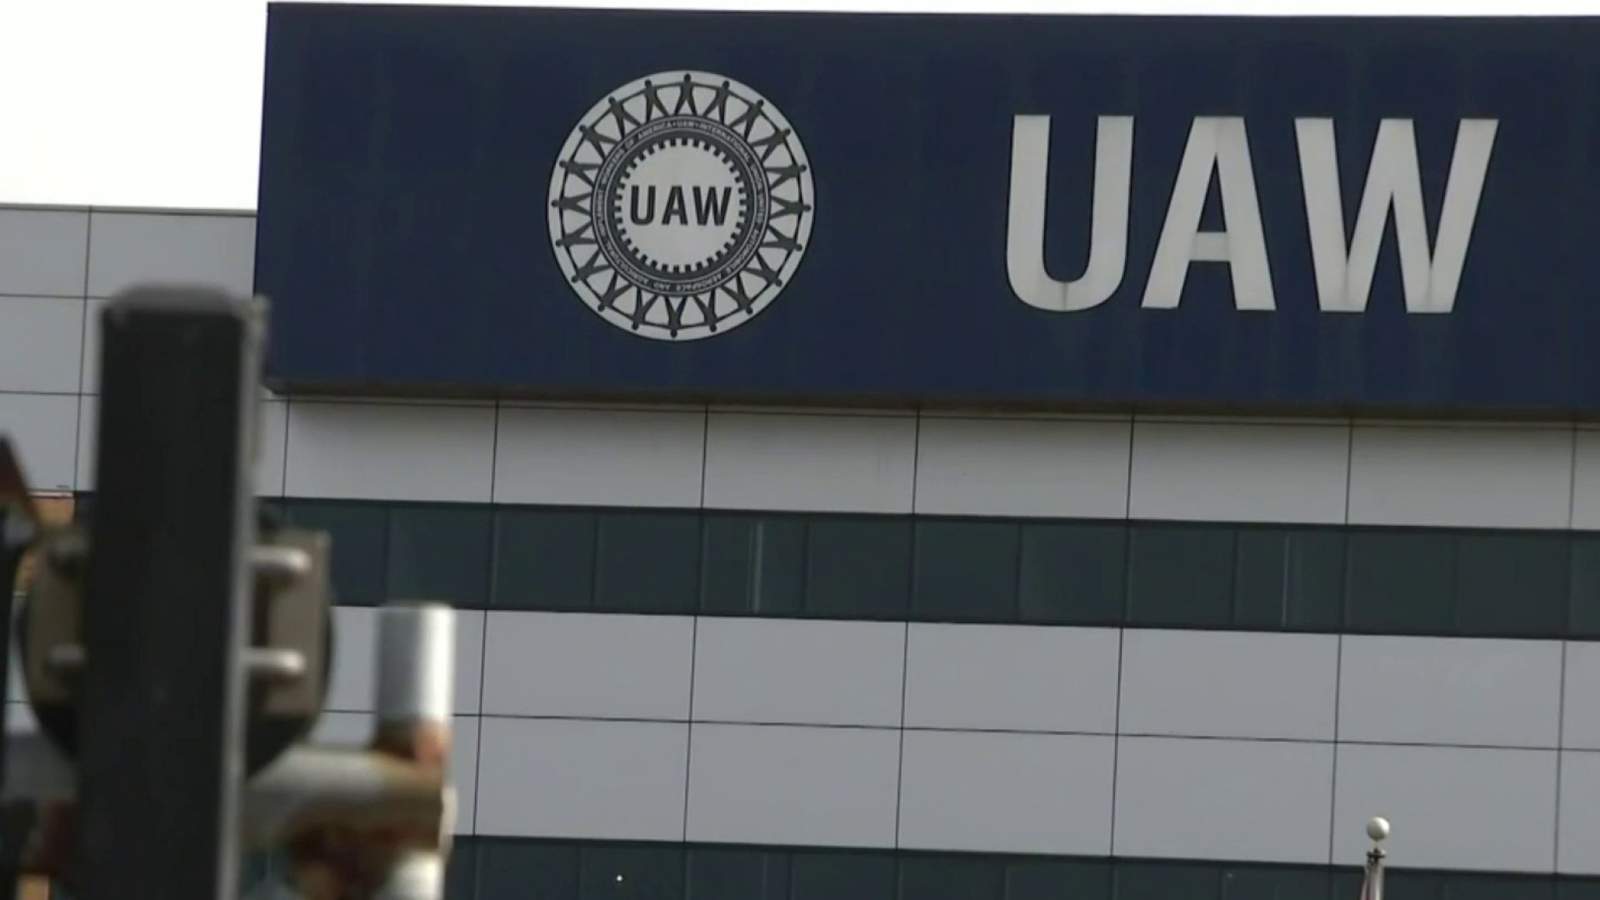 UAW, US Attorney reach settlement to reform union after corruption scandal